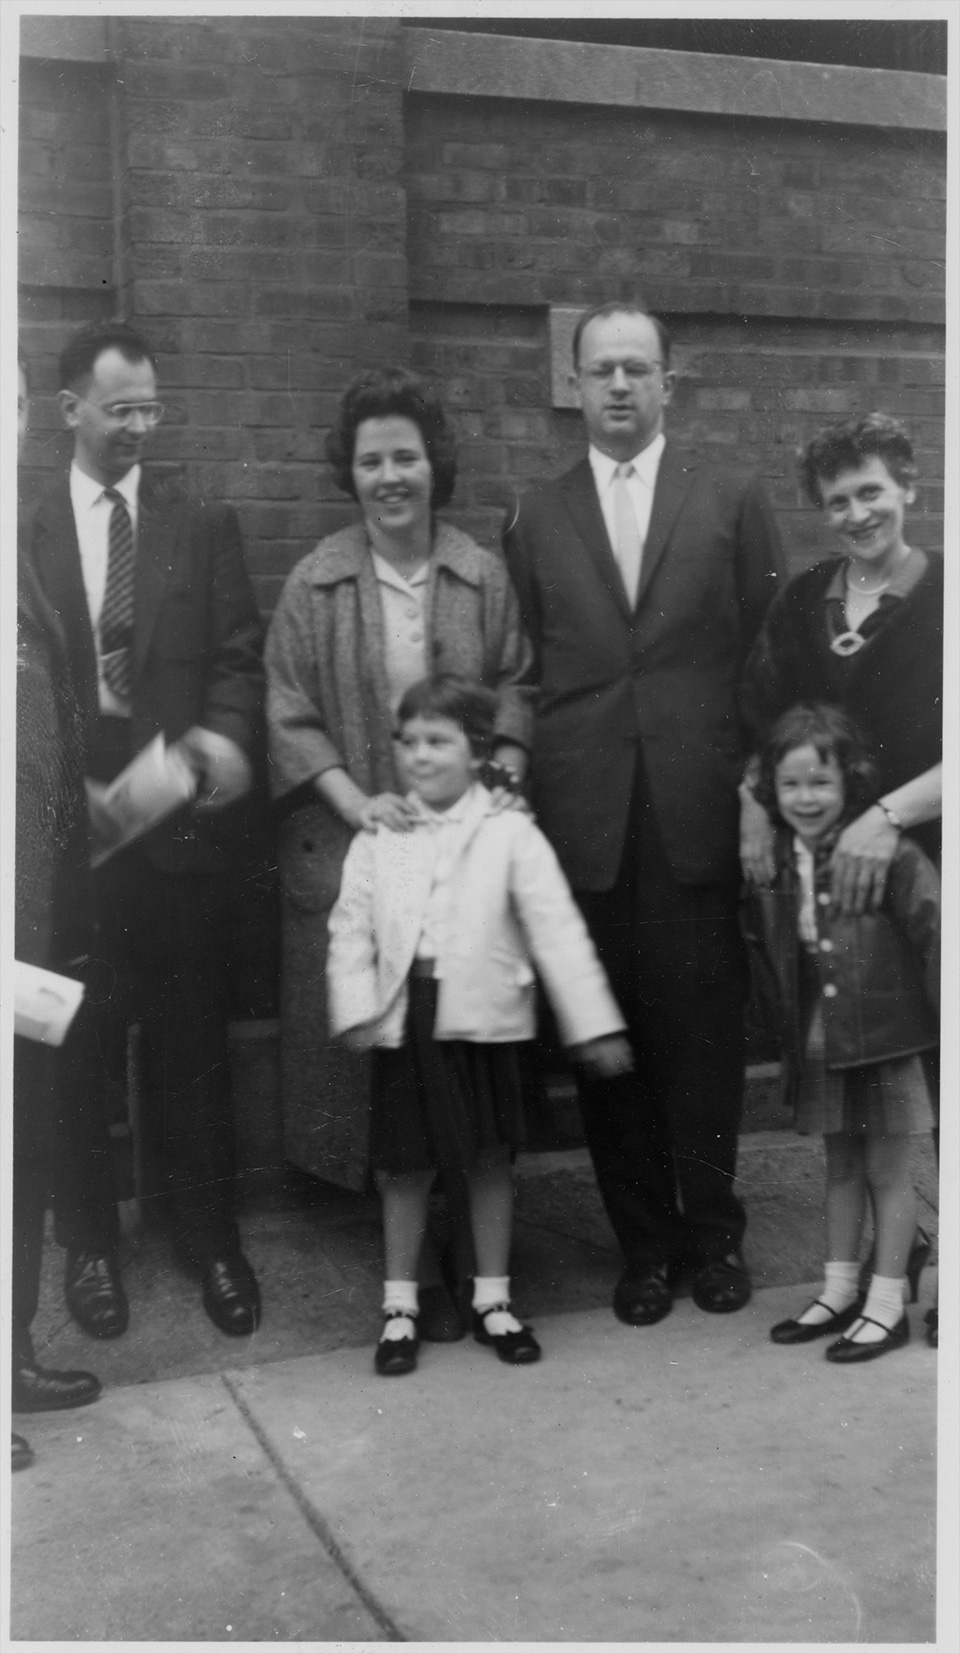 Unidentified man who is partially cut off; Marc, Rita, R.S., and Rosamond Mendelsohn stand in front of a brick-walled building. Rita has her hands in front of her on Ruth’s shoulders, as does Rosamond on Sally’s shoulders. Rosamond, Sally, Rita, and Ruth are smiling.